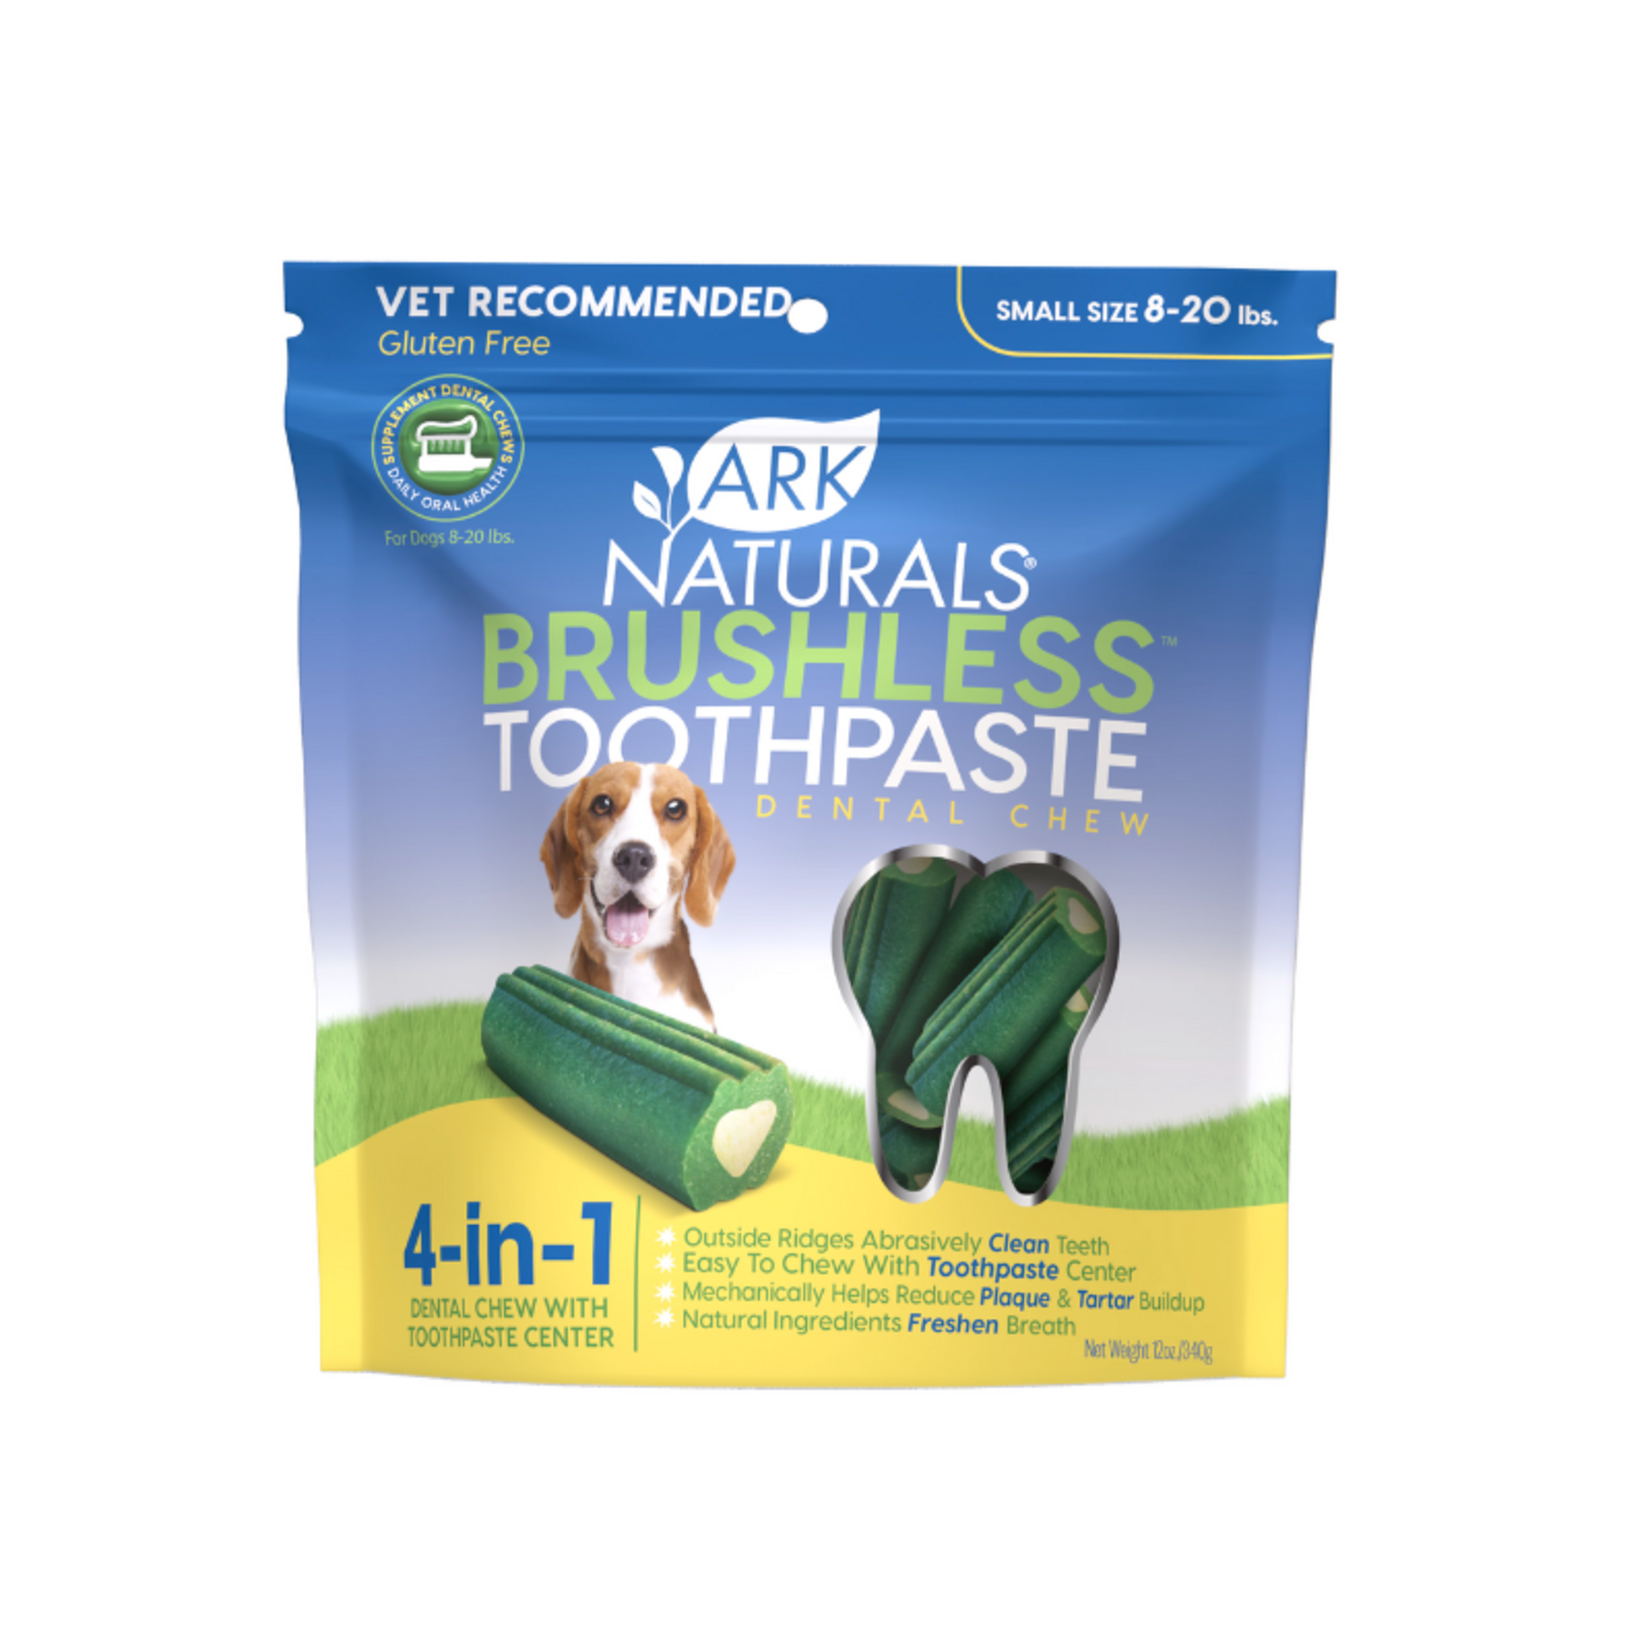 Ark Naturals 12 oz. Dental Chew for Small Dogs - Breath-Less Chewable Brushless Toothpaste - Ark Naturals